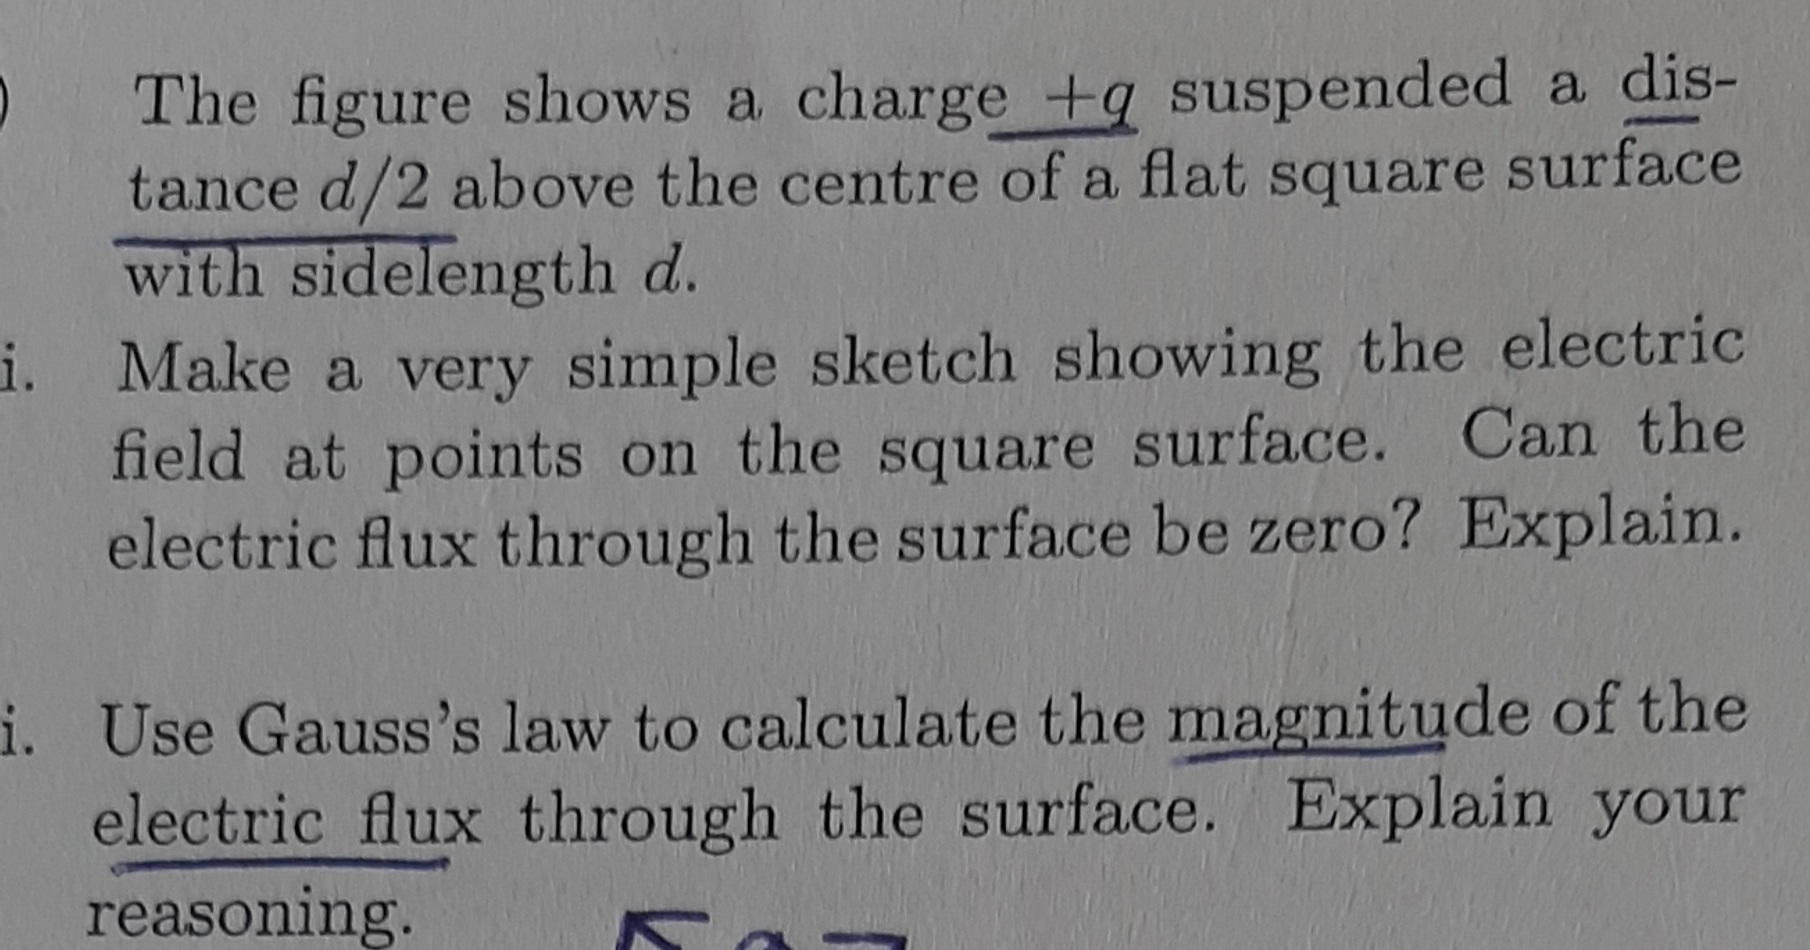 The figure shows a charge +q suspended a dis-
tance d/2 above the centre of a flat square surface
with sidelength d.
i. Make a very simple sketch showing the electric
field at points on the square surface. Can the
electric flux through the surface be zero? Explain.
i. Use Gauss's law to calculate the magnitude of the
electric flux through the surface. Explain your
reasoning.
